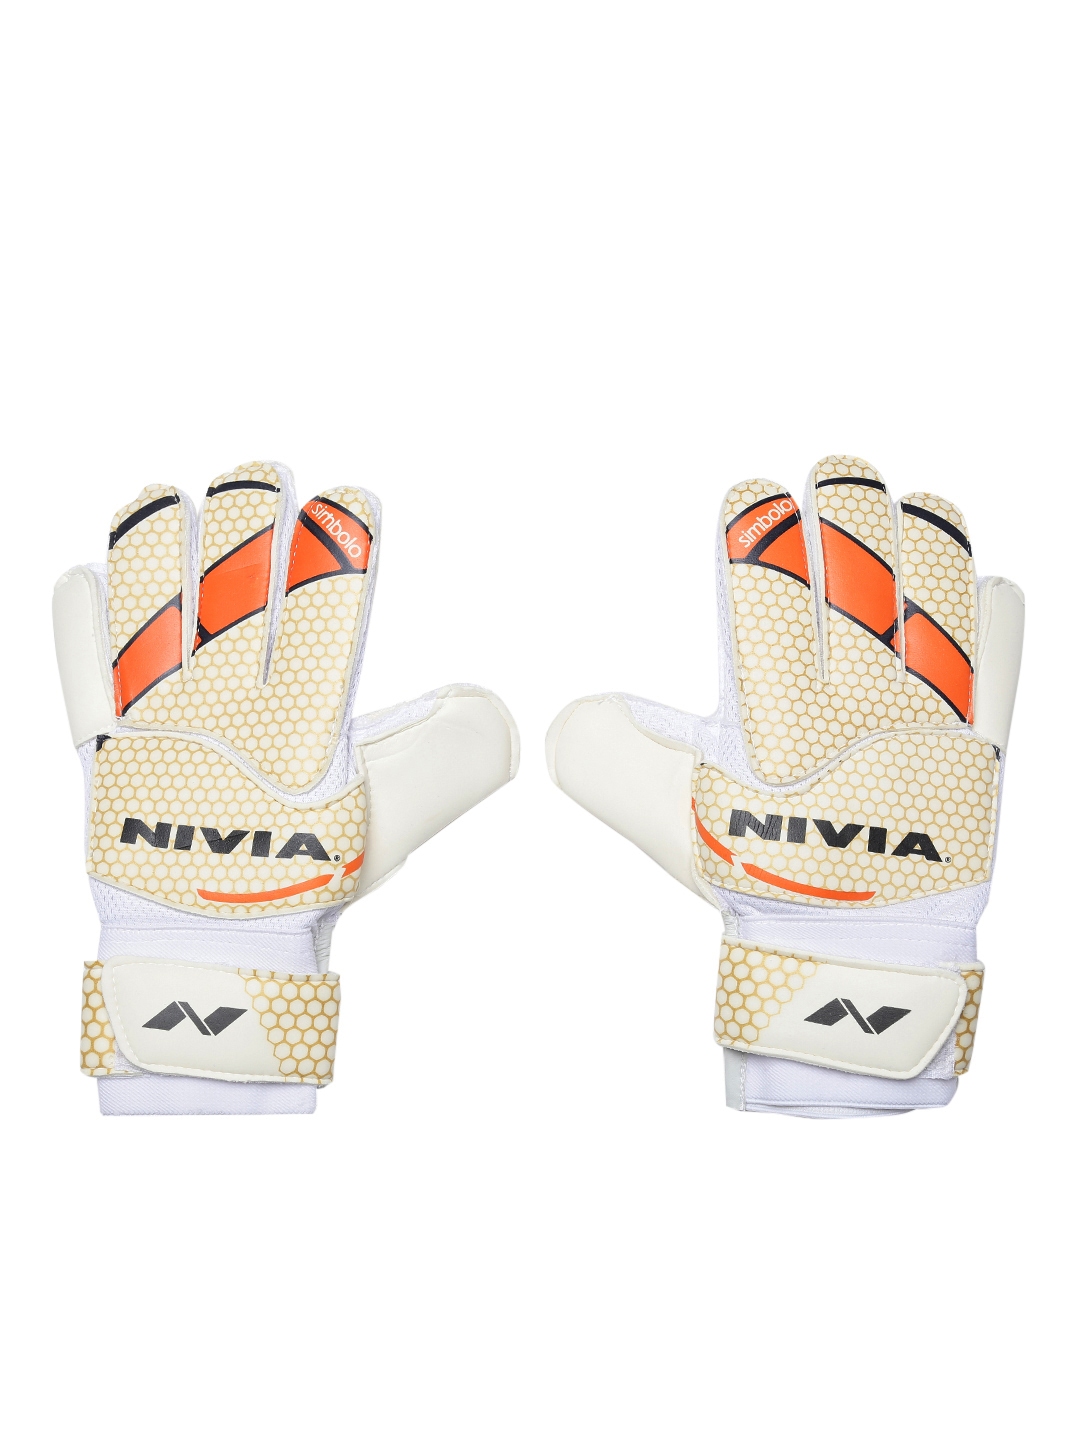 Buy NIVIA Unisex Off White & Beige Printed Simbola Goal Keeper Football  Gloves - Sports Accessories for Unisex Kids 1661107